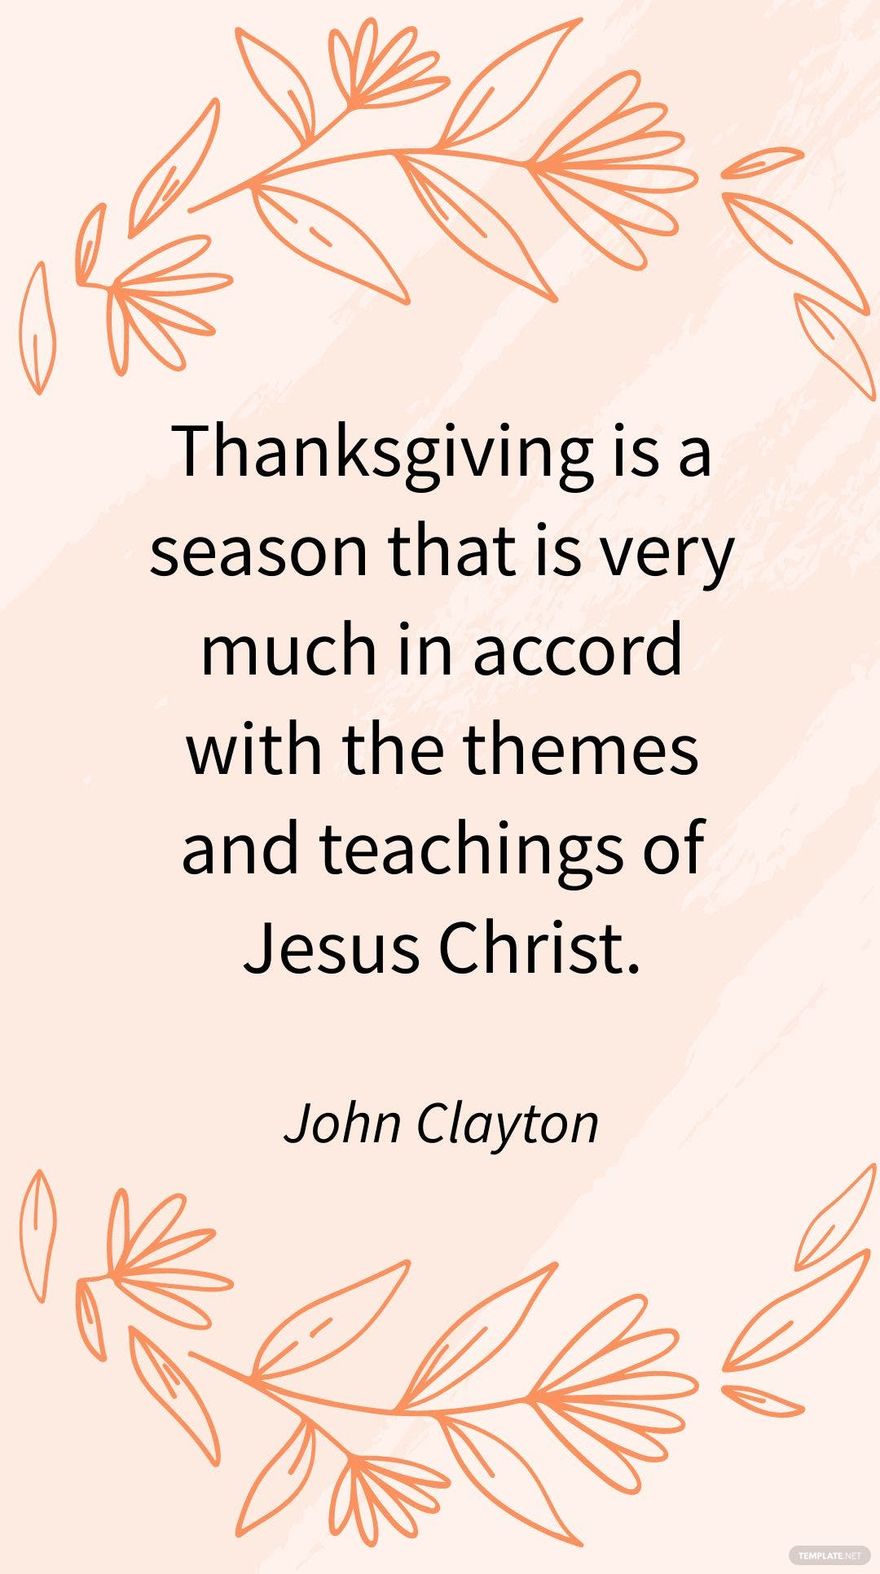 John Clayton - Thanksgiving is a season that is very much in accord with the themes and teachings of Jesus Christ.